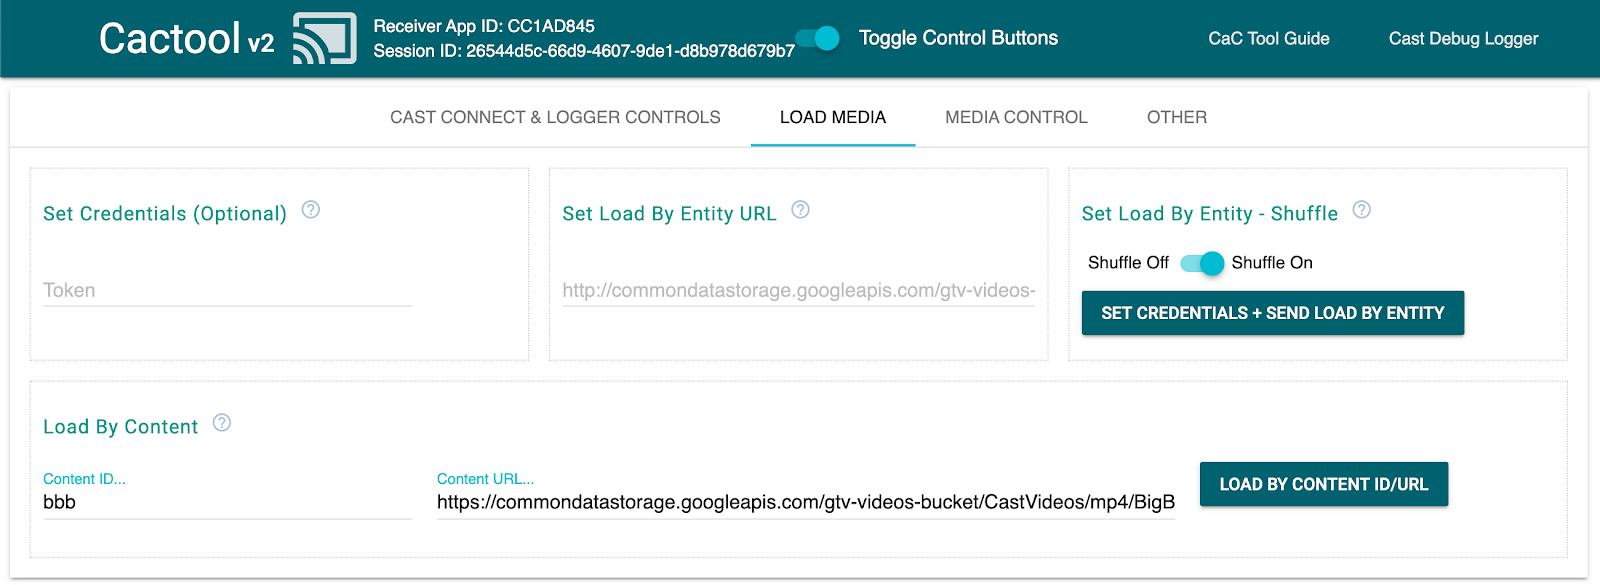 Image of the 'Load Media' tab of the Command and Control (CaC) Tool